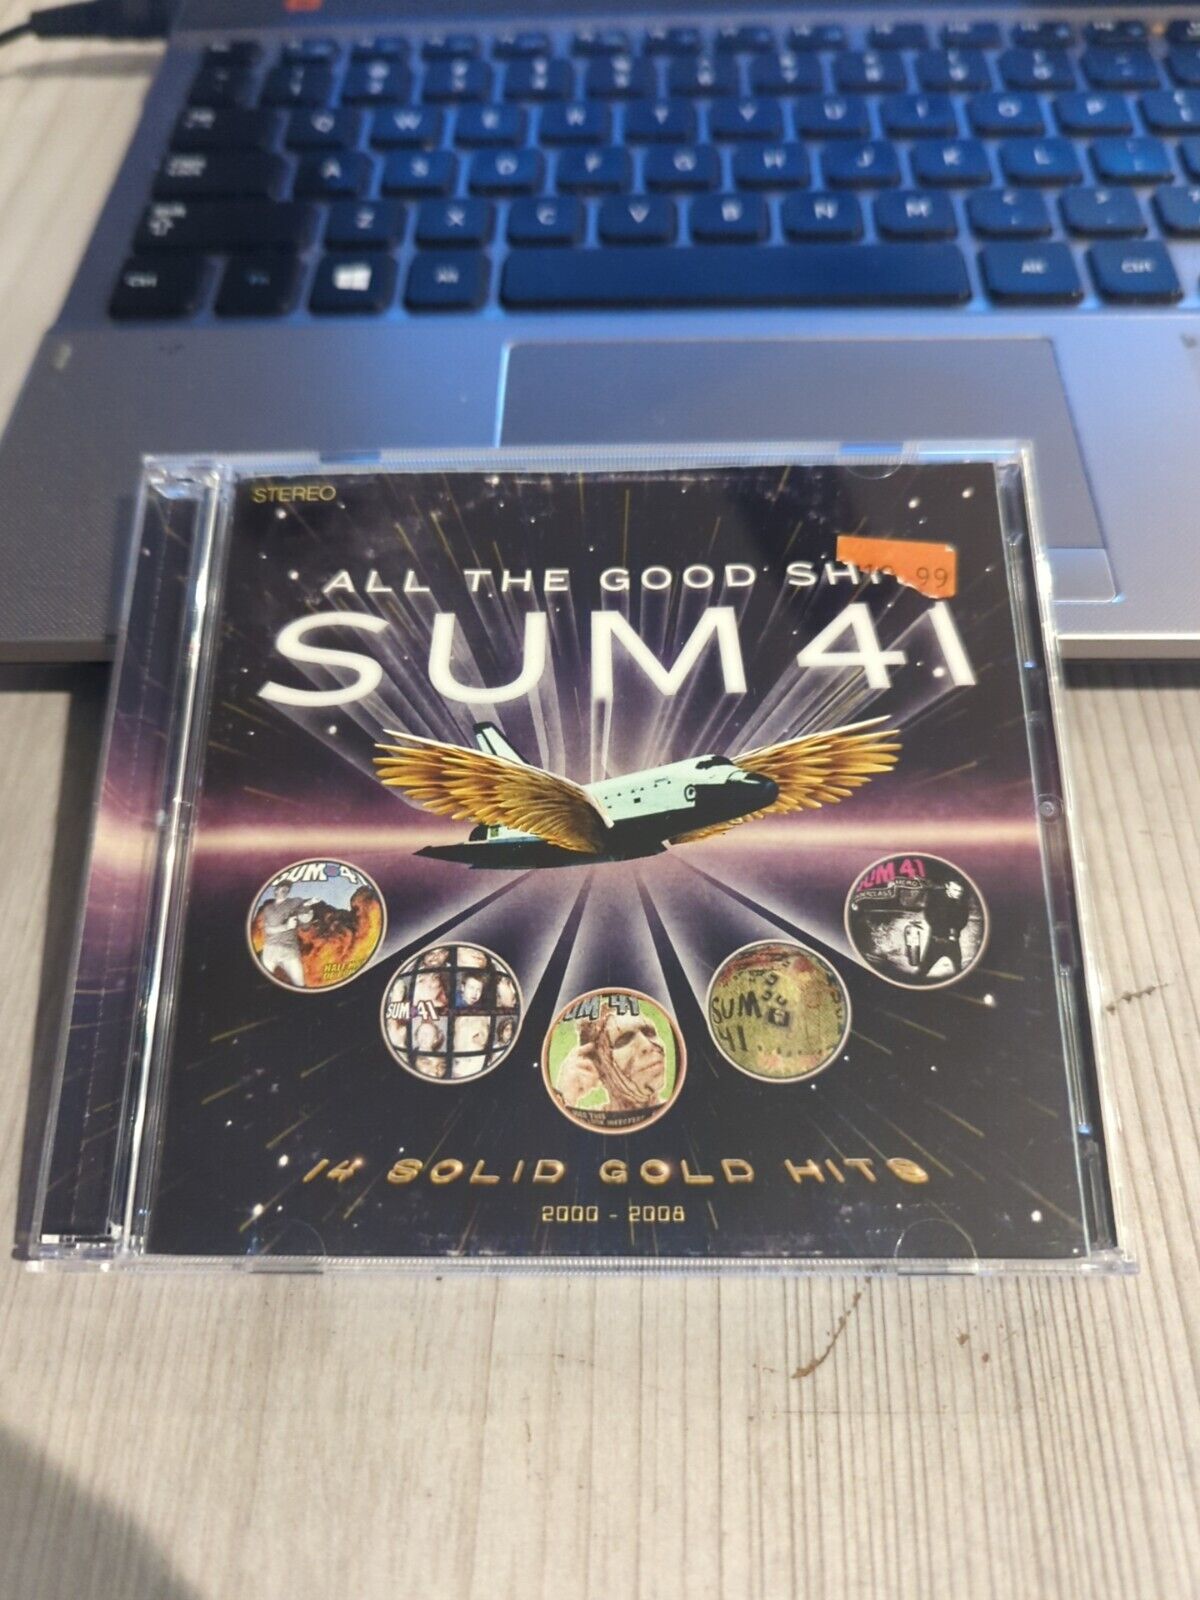 CD 2706 - Sum 41 - All the Good Shit: 14 Solid Gold Hits  Canada - Import